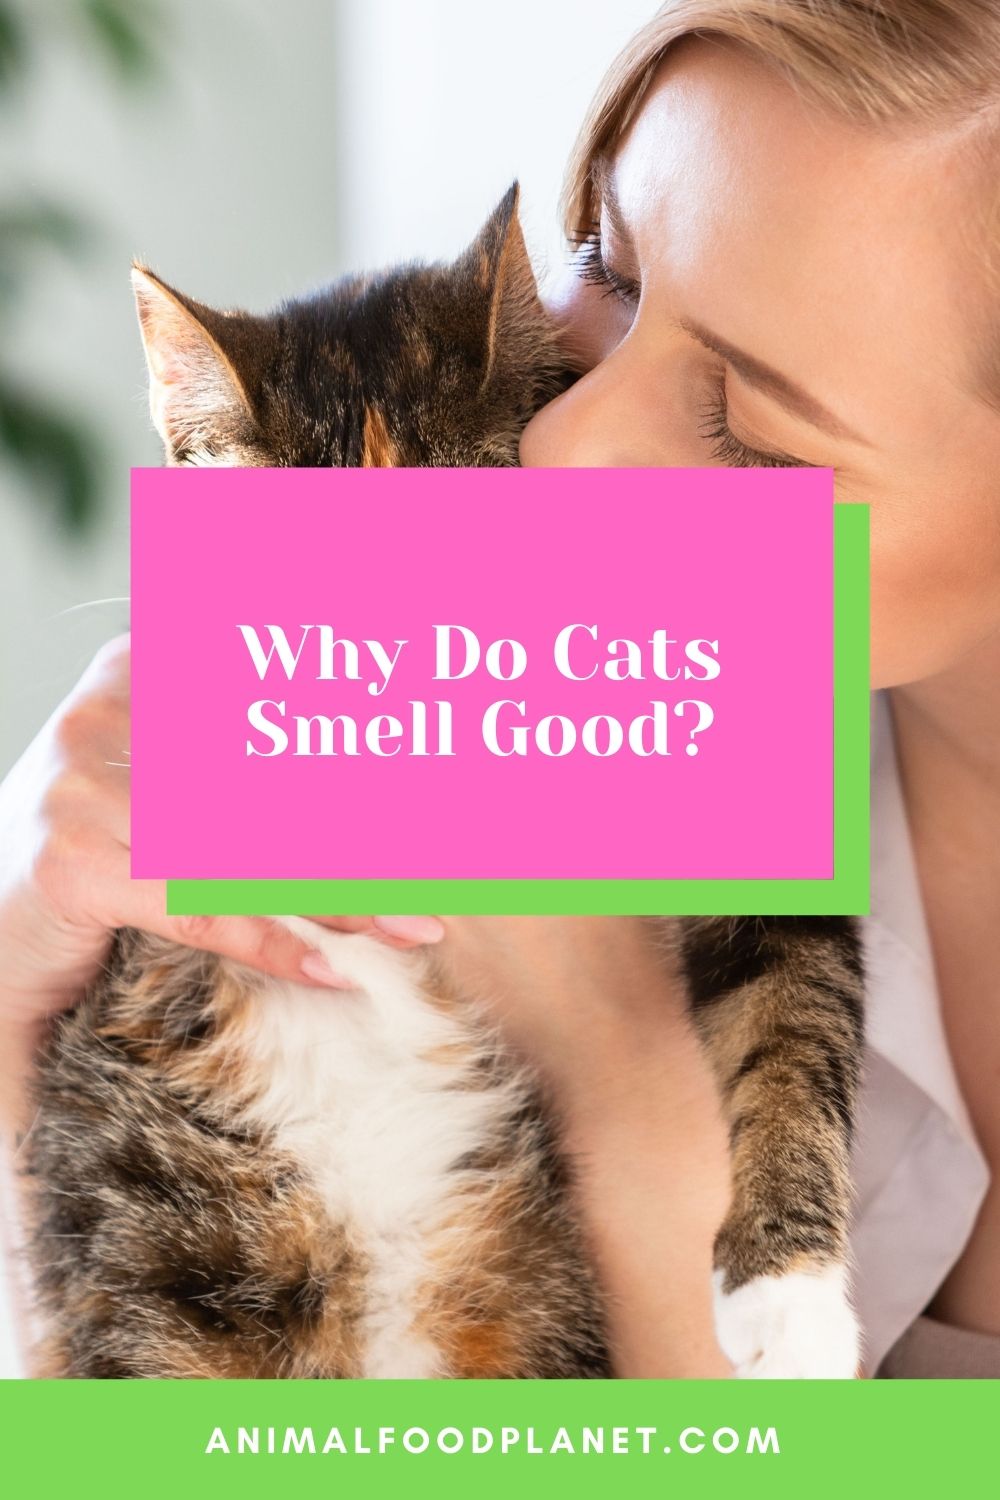 Why Do Cats Smell Good